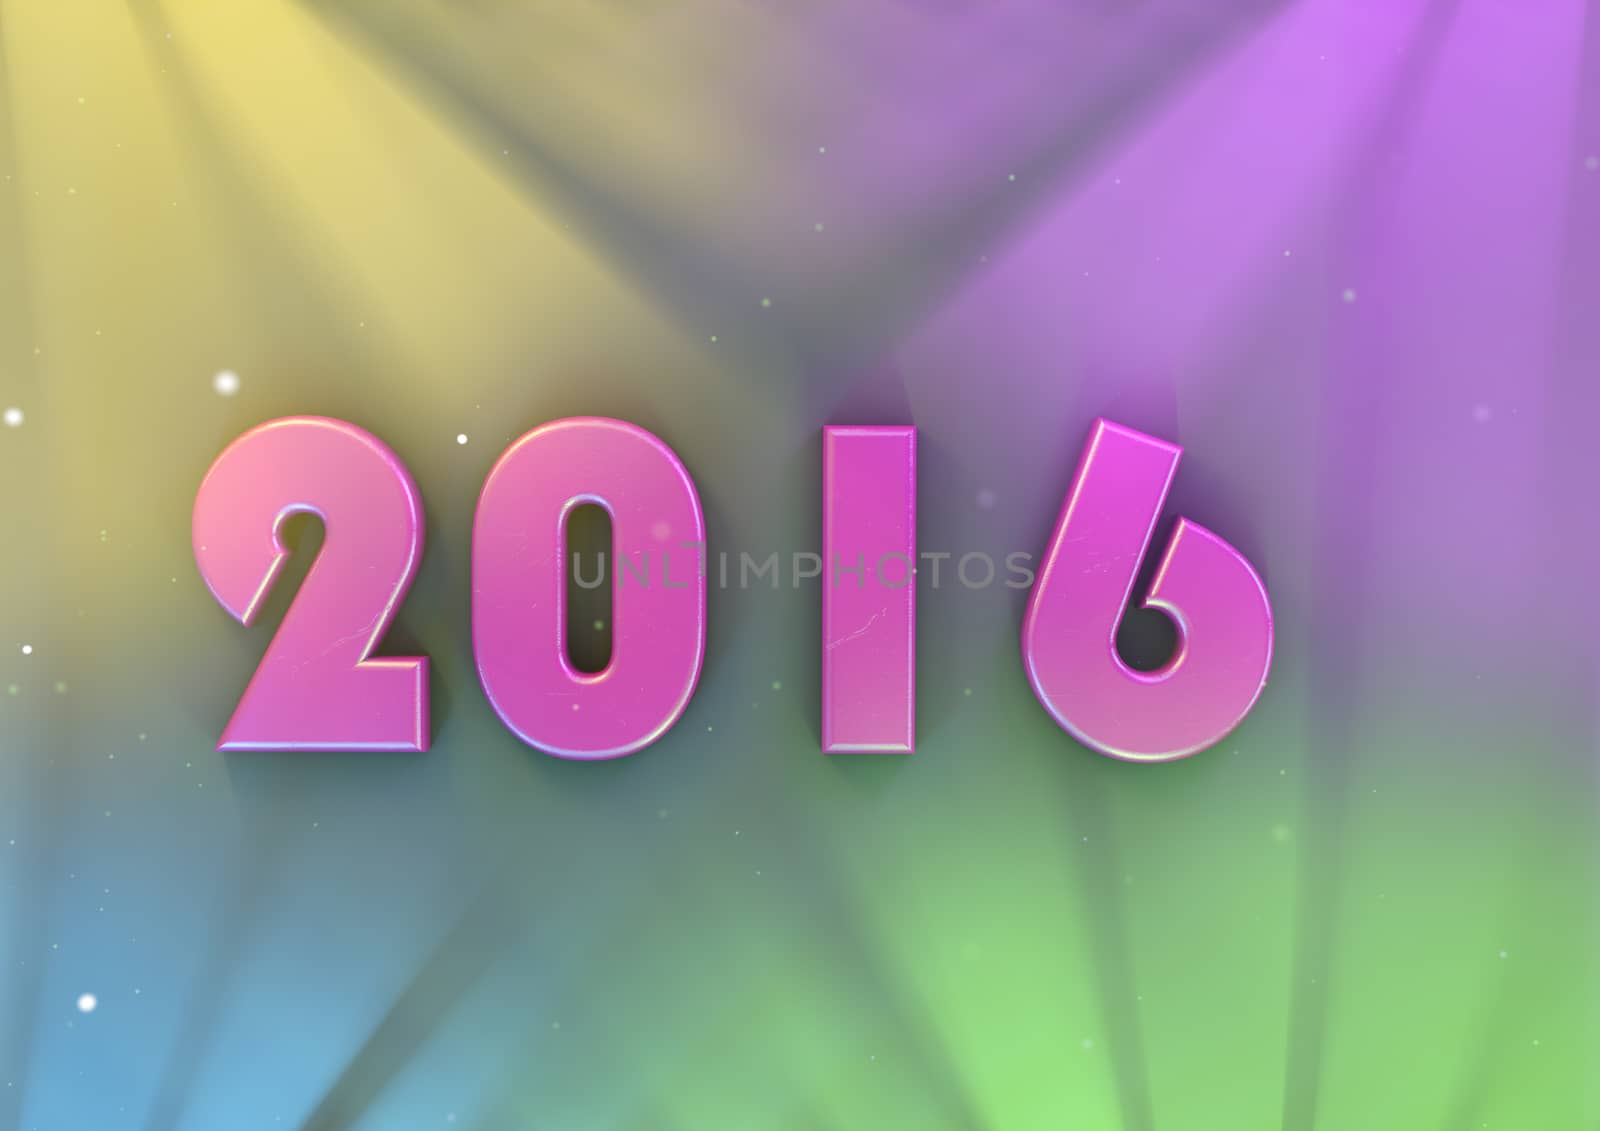 New year date 2016 with colourful lighting